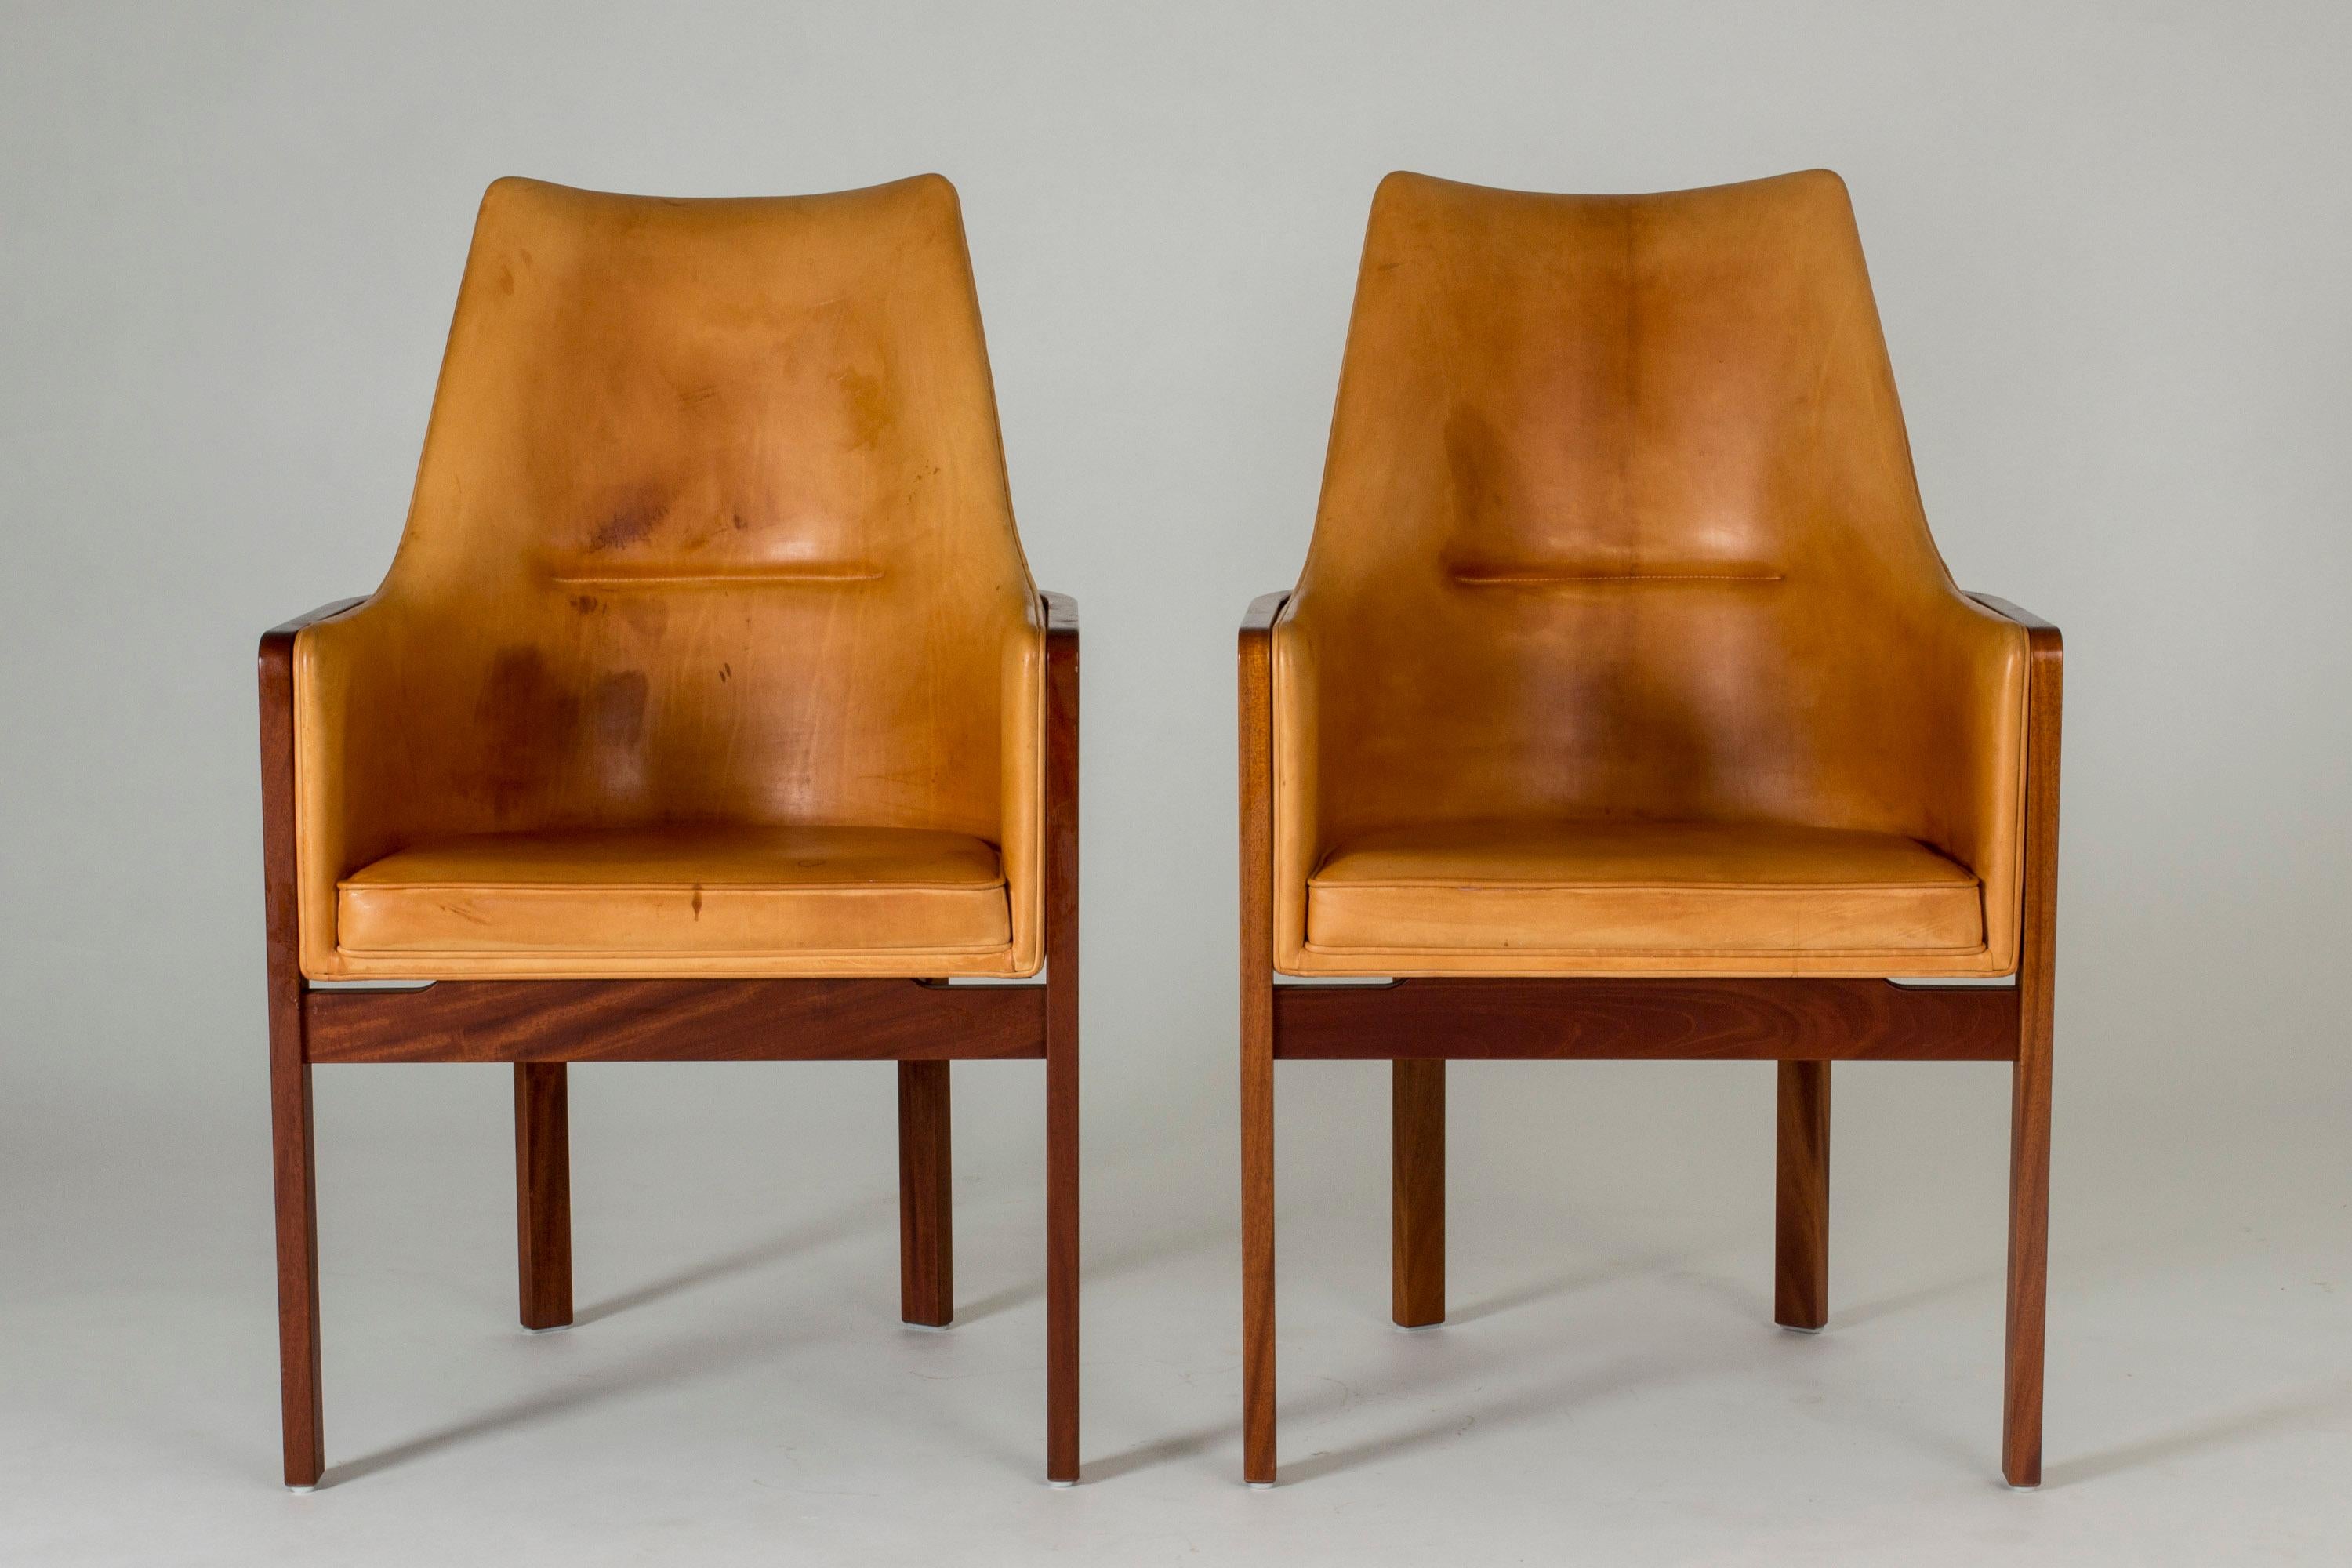 Pair of elegant armchairs by Bernt Petersen, with rosewood frames and comfortable natural leather seats and backs. Smooth lines with nicely contrasting materials. Leather in very good condition, but with some patina.